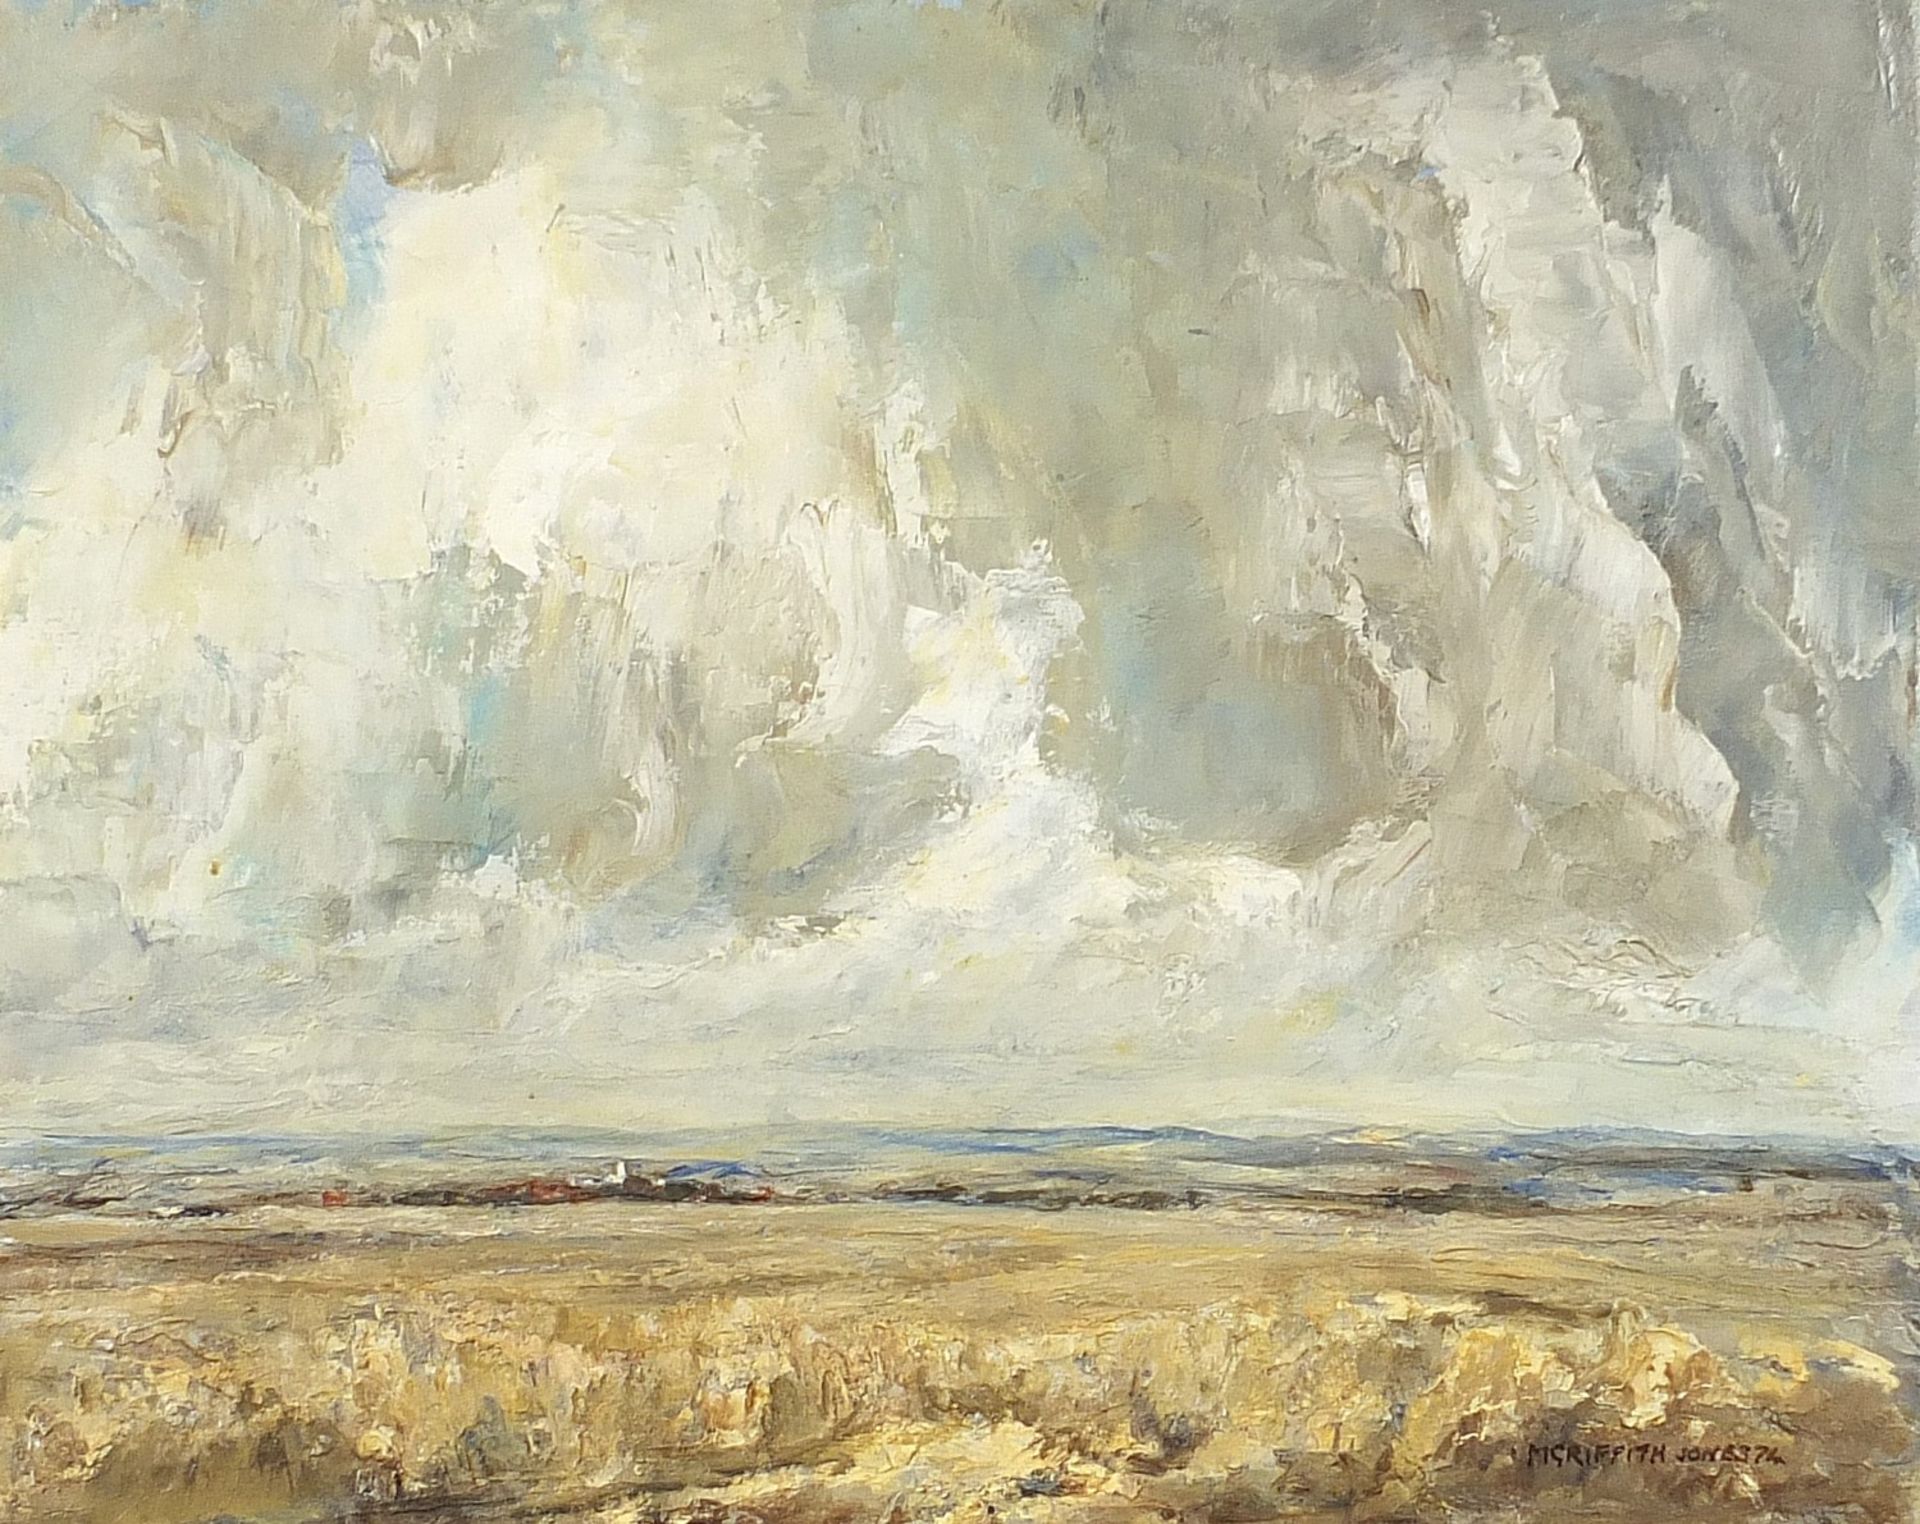 Mervin Griffith-Jones '74 - Summer clouds, Impressionist landscape, oil on canvas, mounted and